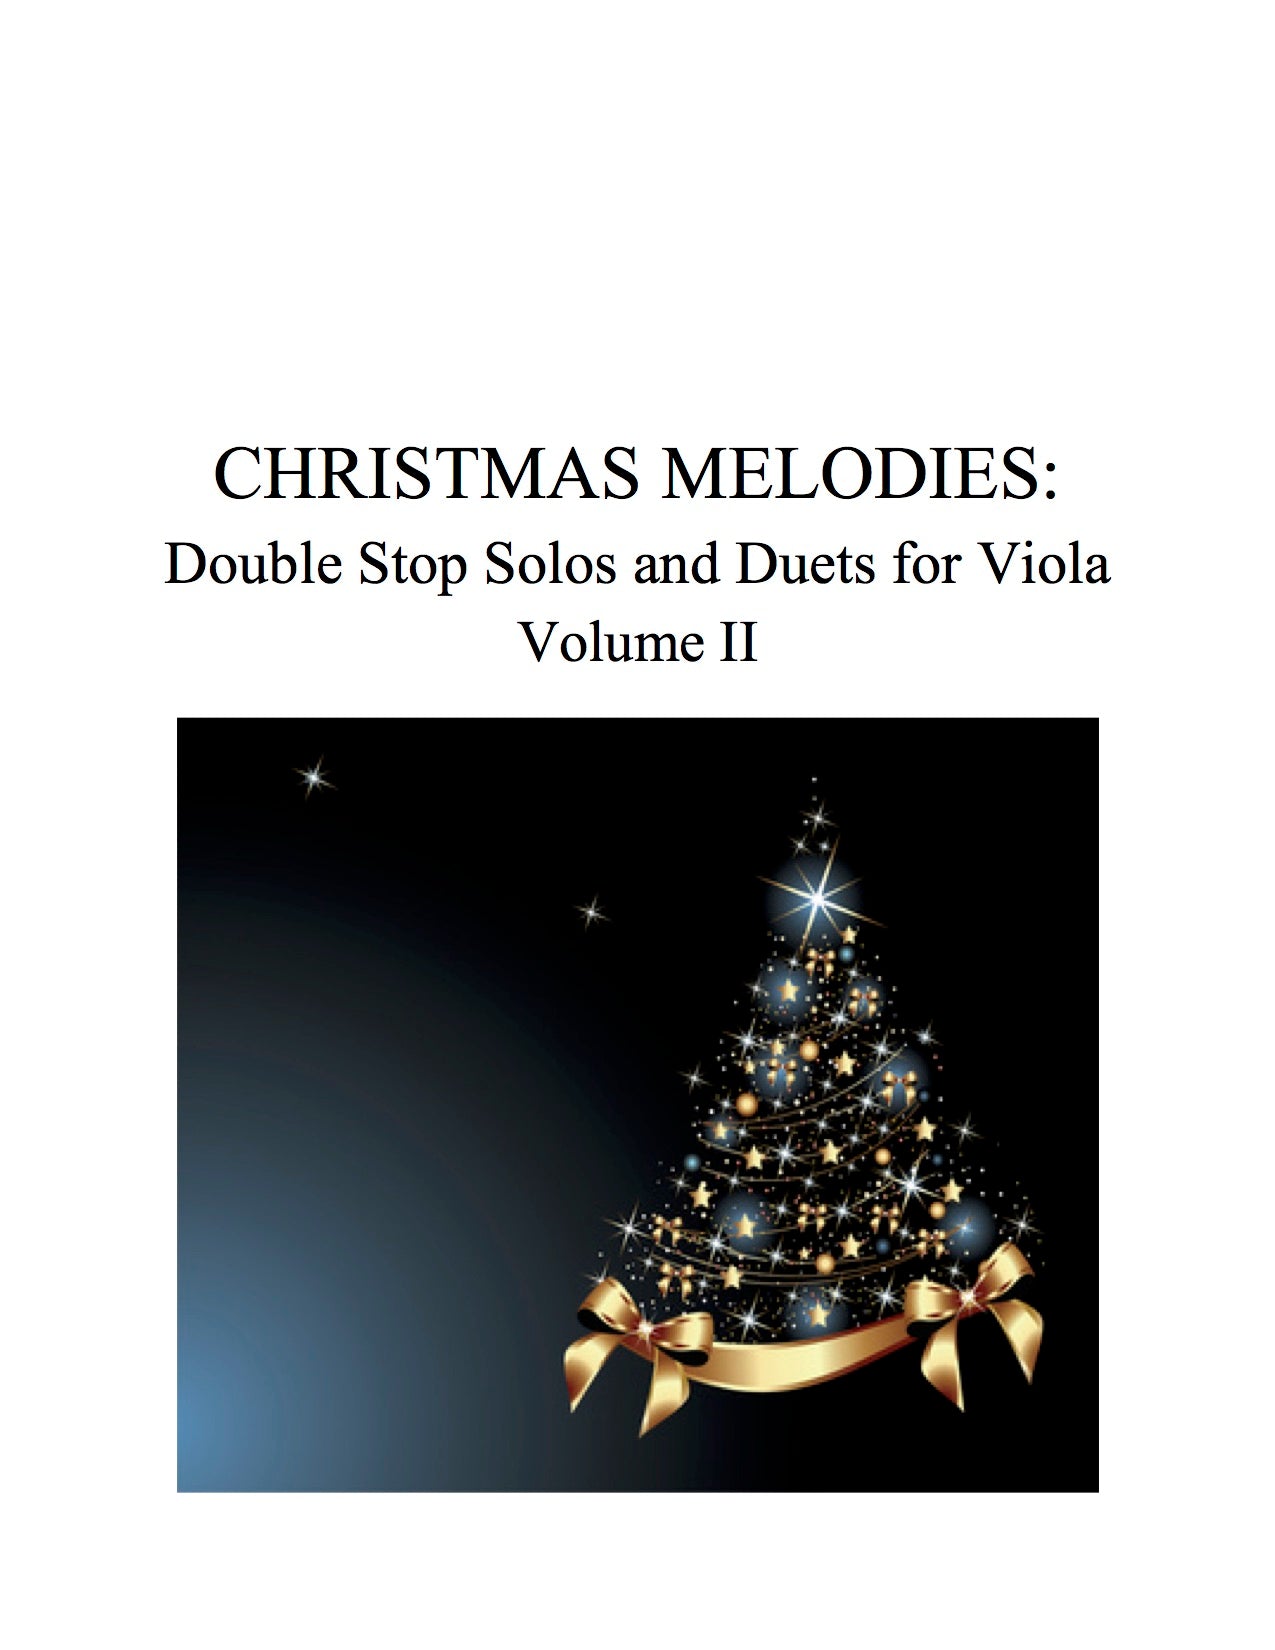 037 - Christmas Melodies: Double Stop Solos and Duets For Viola, Volume II